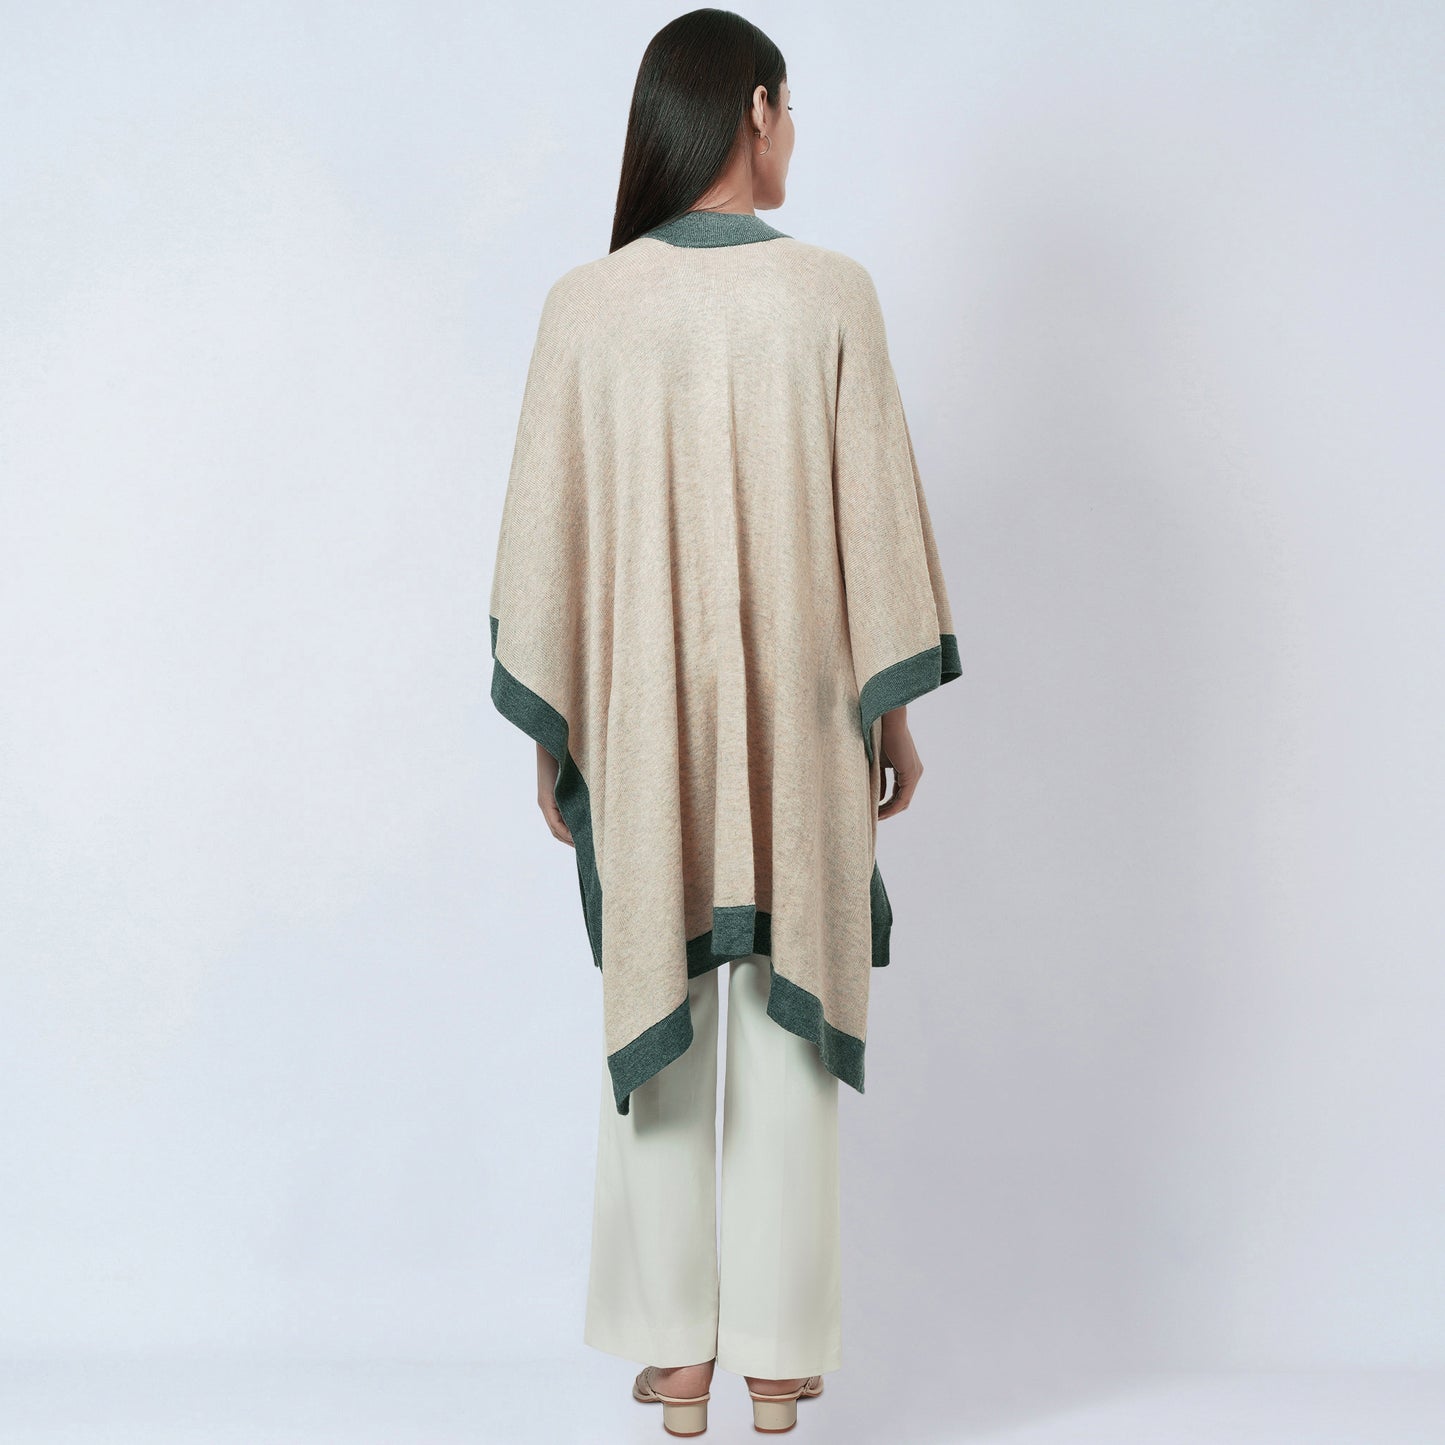 Beige and Grey Long Knitted Cashmere Cape